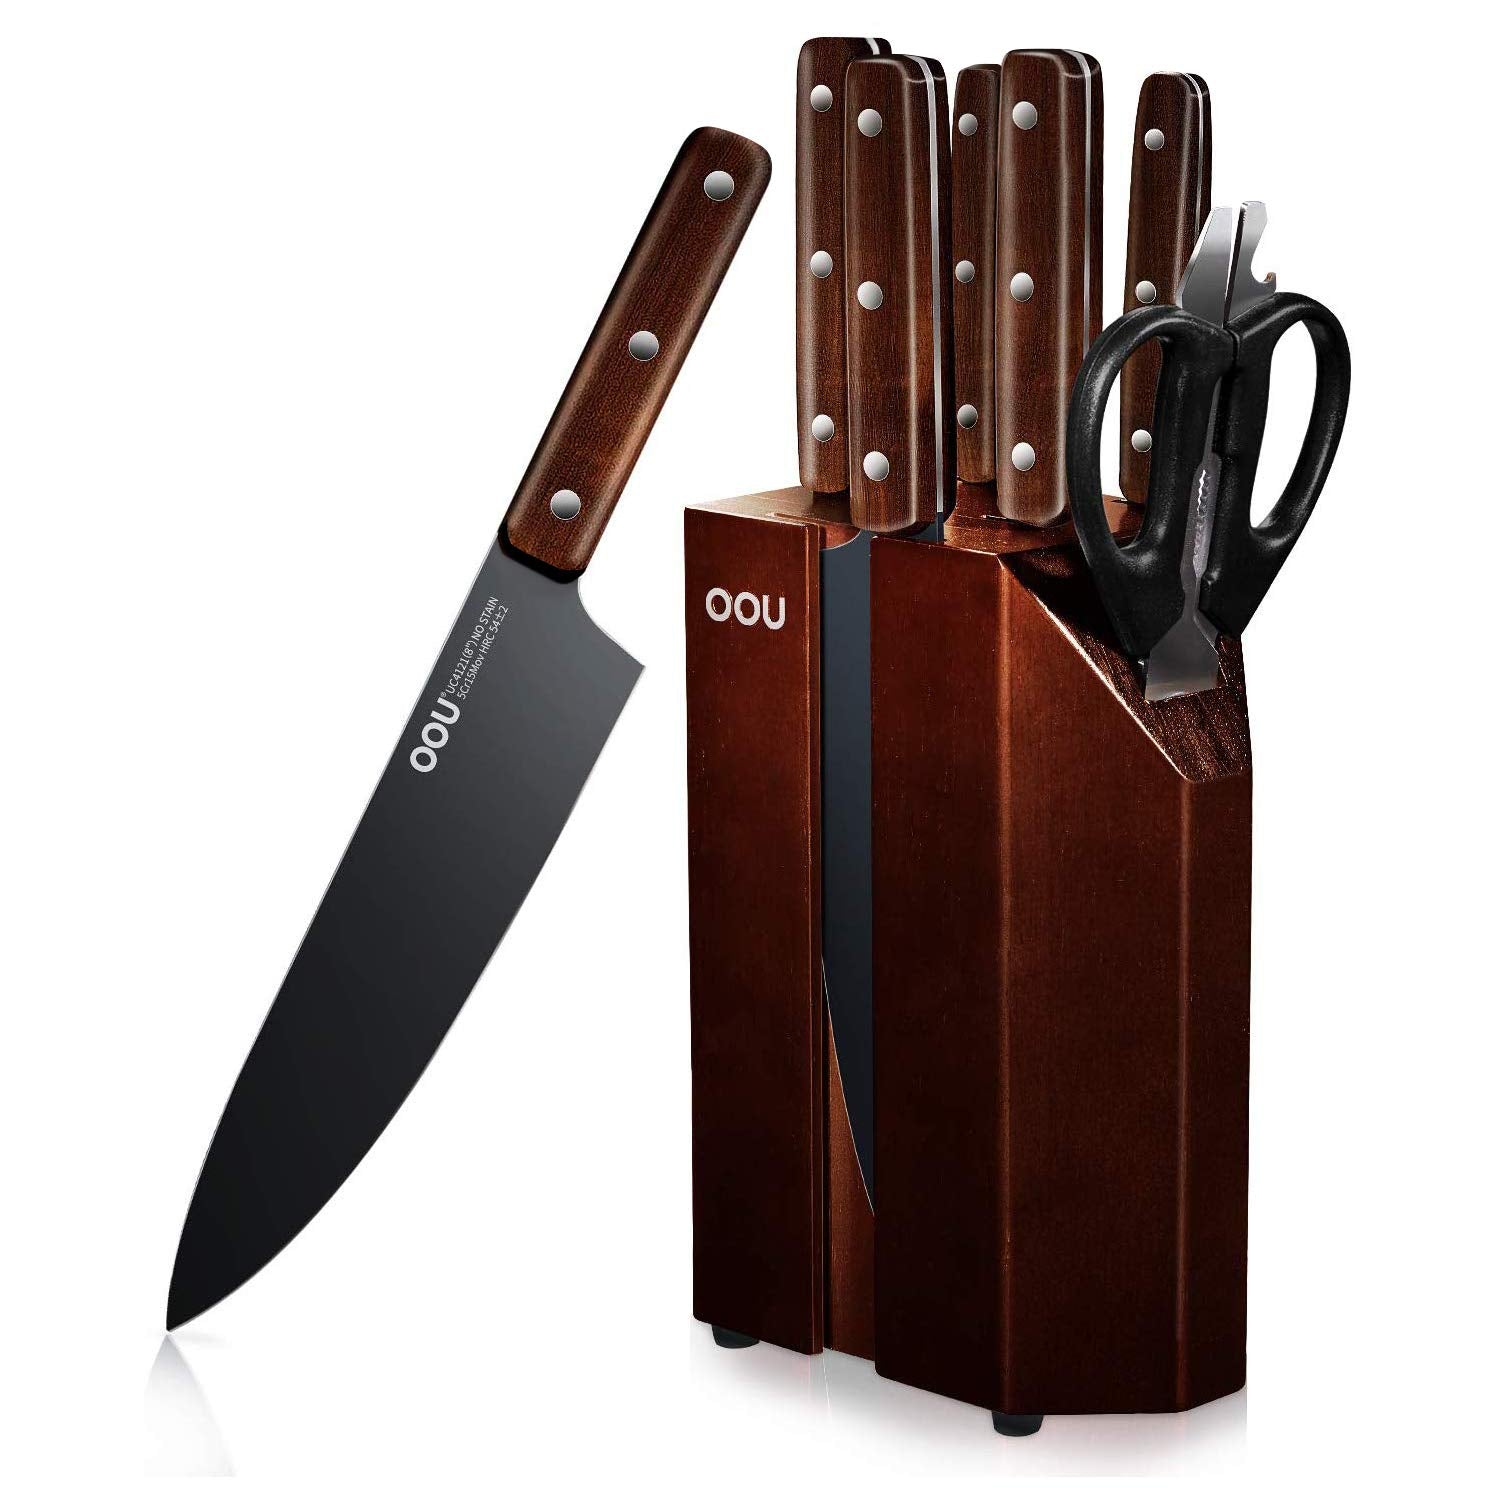 8 Pieces High Carbon Stainless Steel Knife Set